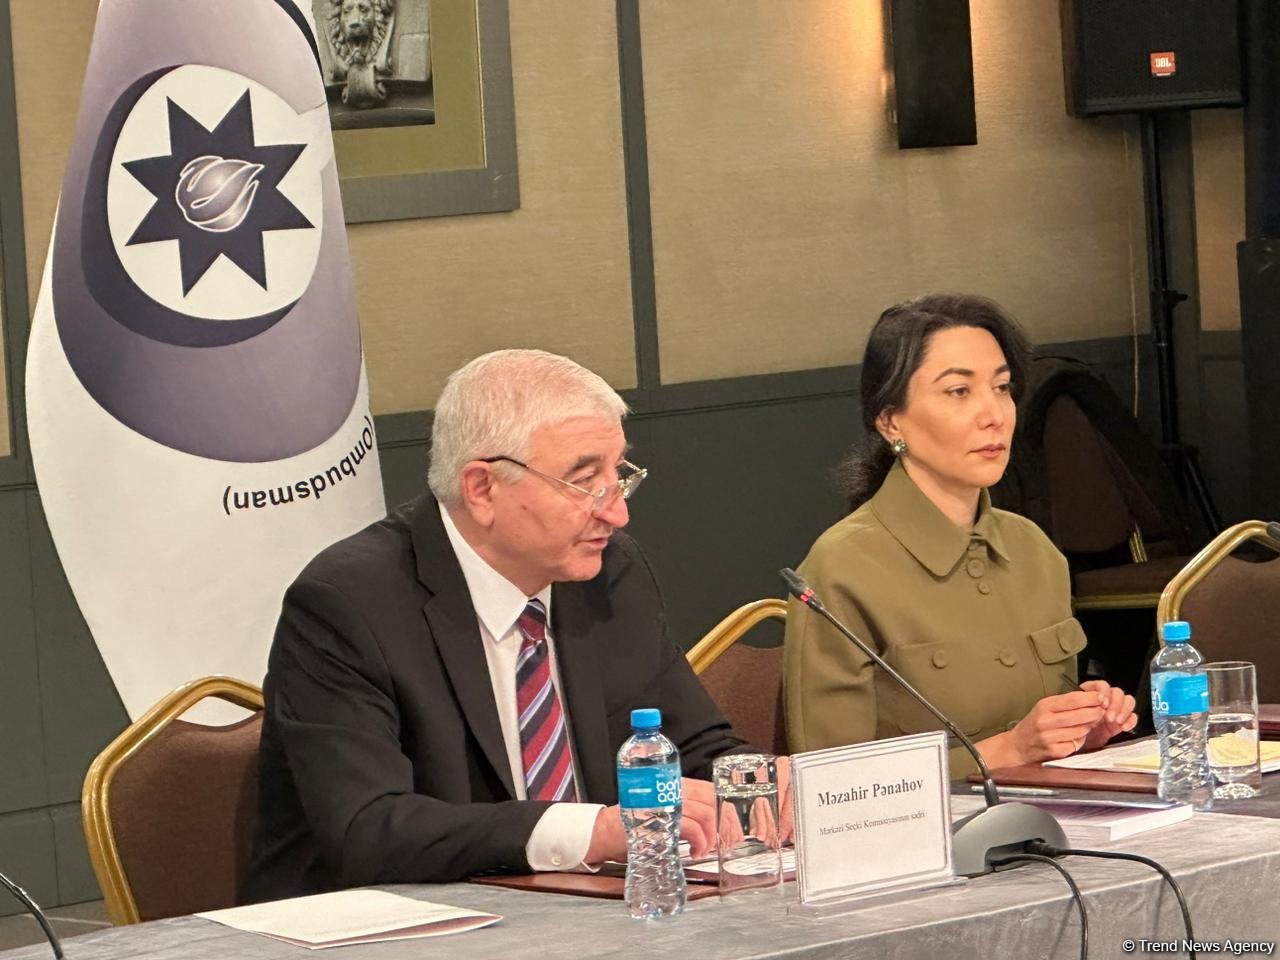 Azerbaijan hosts round table on "Ensuring electoral right of citizens" (PHOTO)